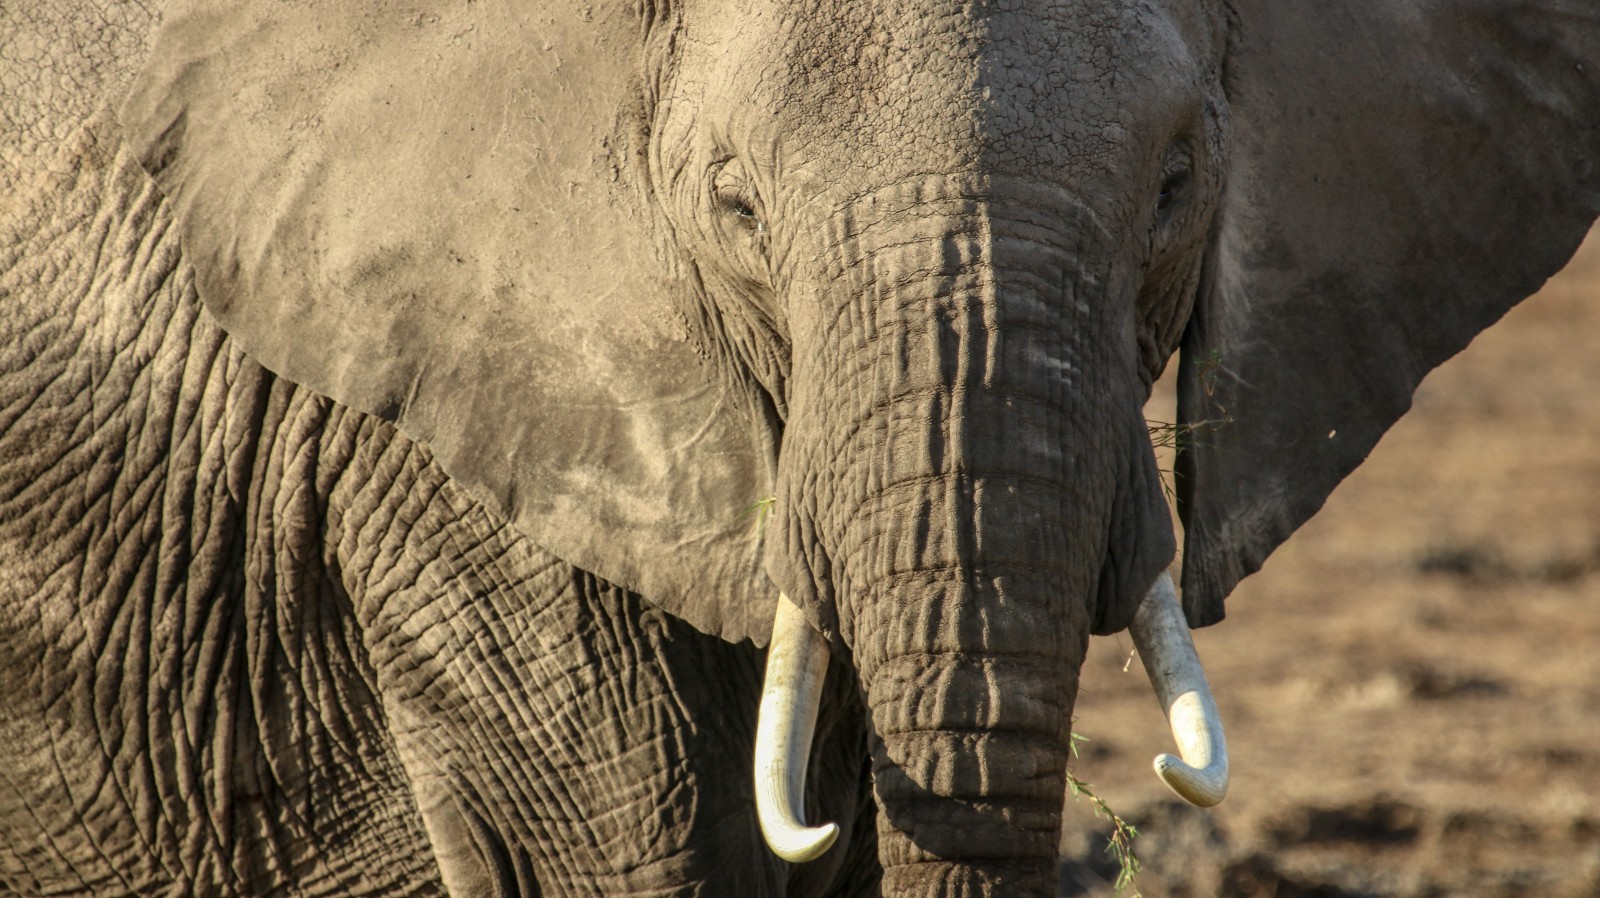 A close-up image on an elephant standing in a dry and dusty landscape